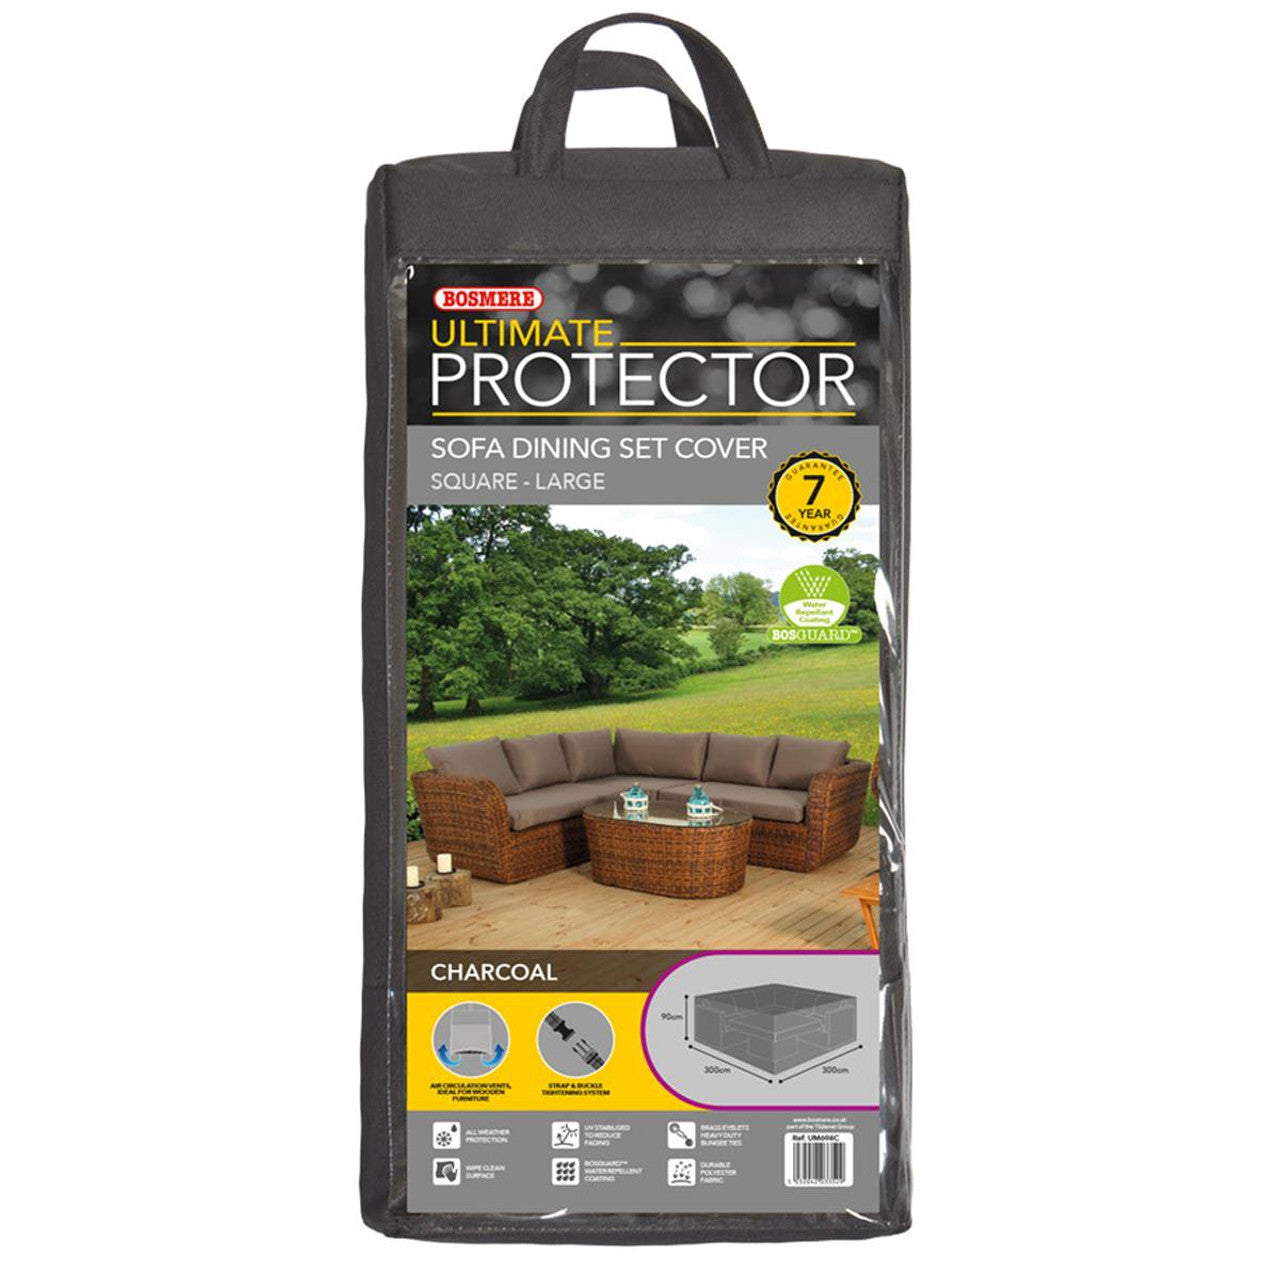 Bosmere Ultimate Protector Outdoor Furniture Cover For Large Corner Set 300cm x 300cm